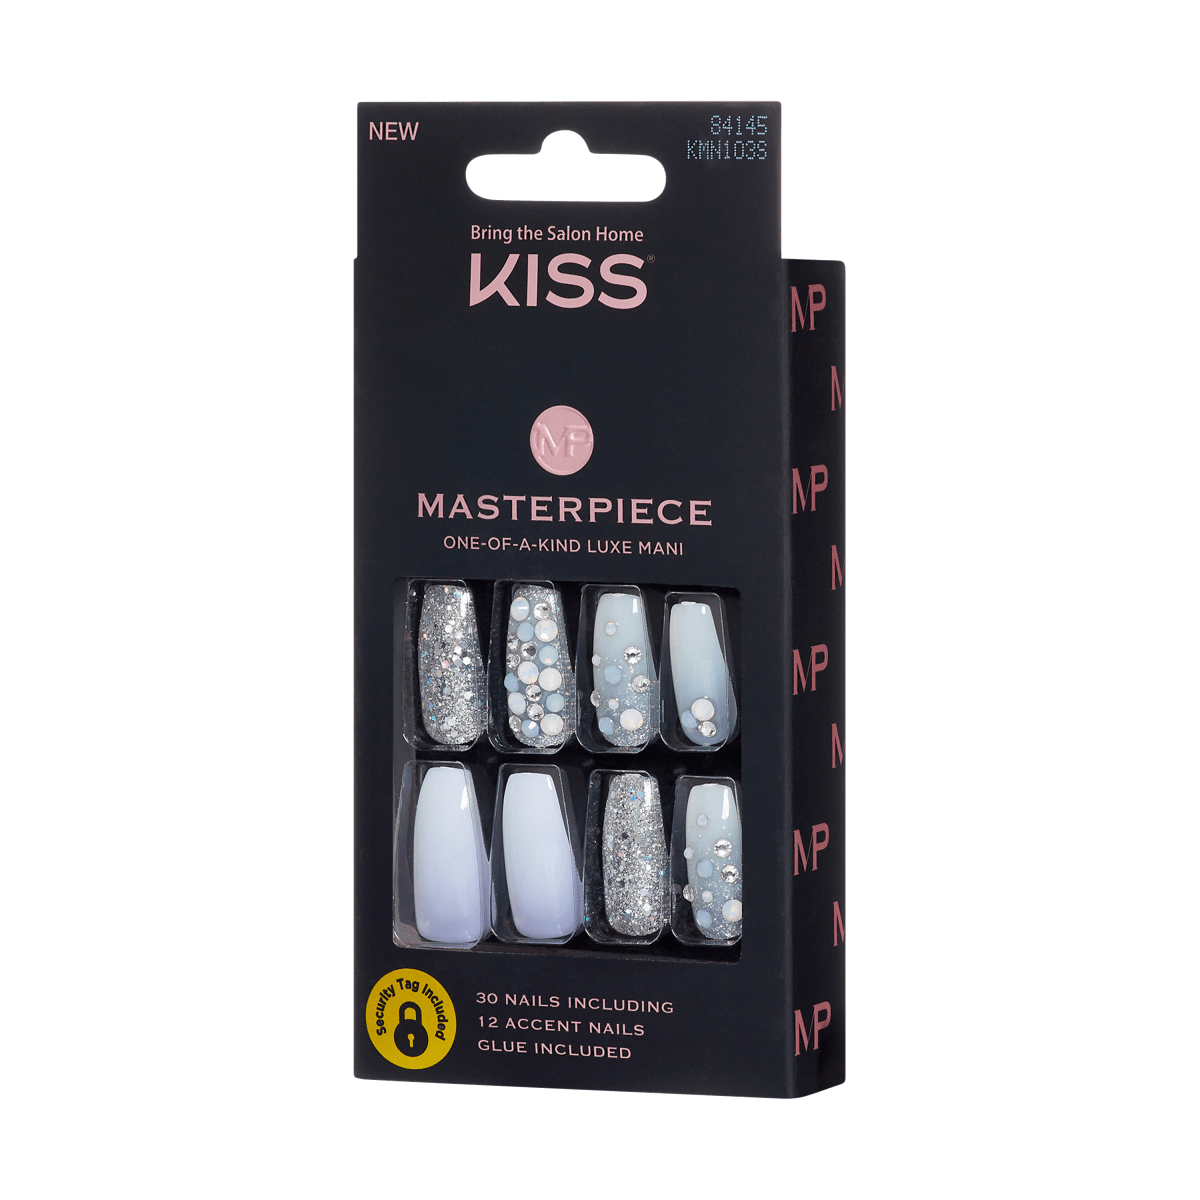 KISS Masterpiece One-of-a-Kind Luxe Mani- No.1